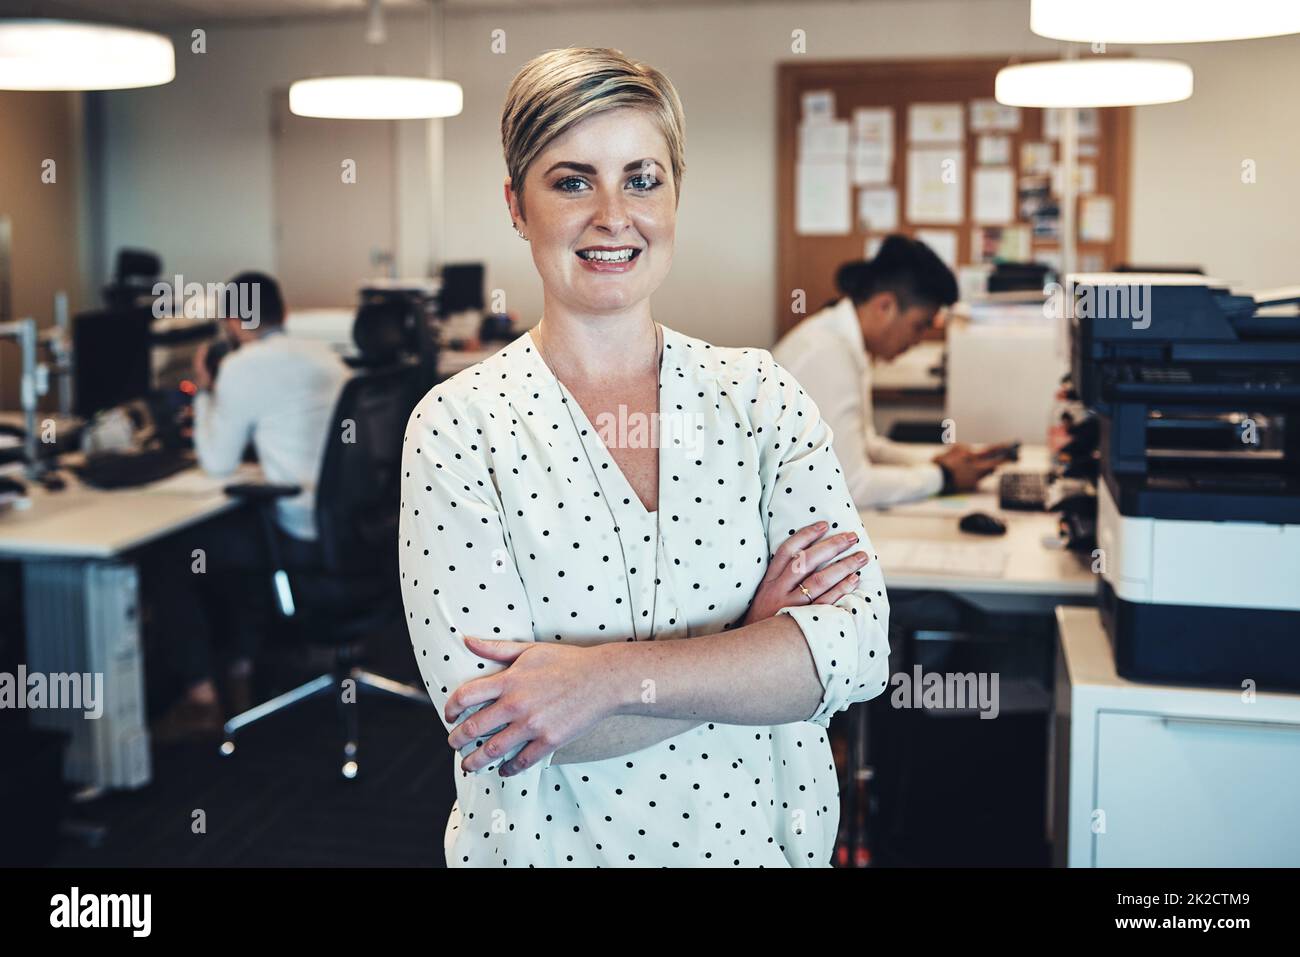 Shes here to implement structure in the office. Portrait of a businesswoman in the office while her colleagues are working in the background. Stock Photo